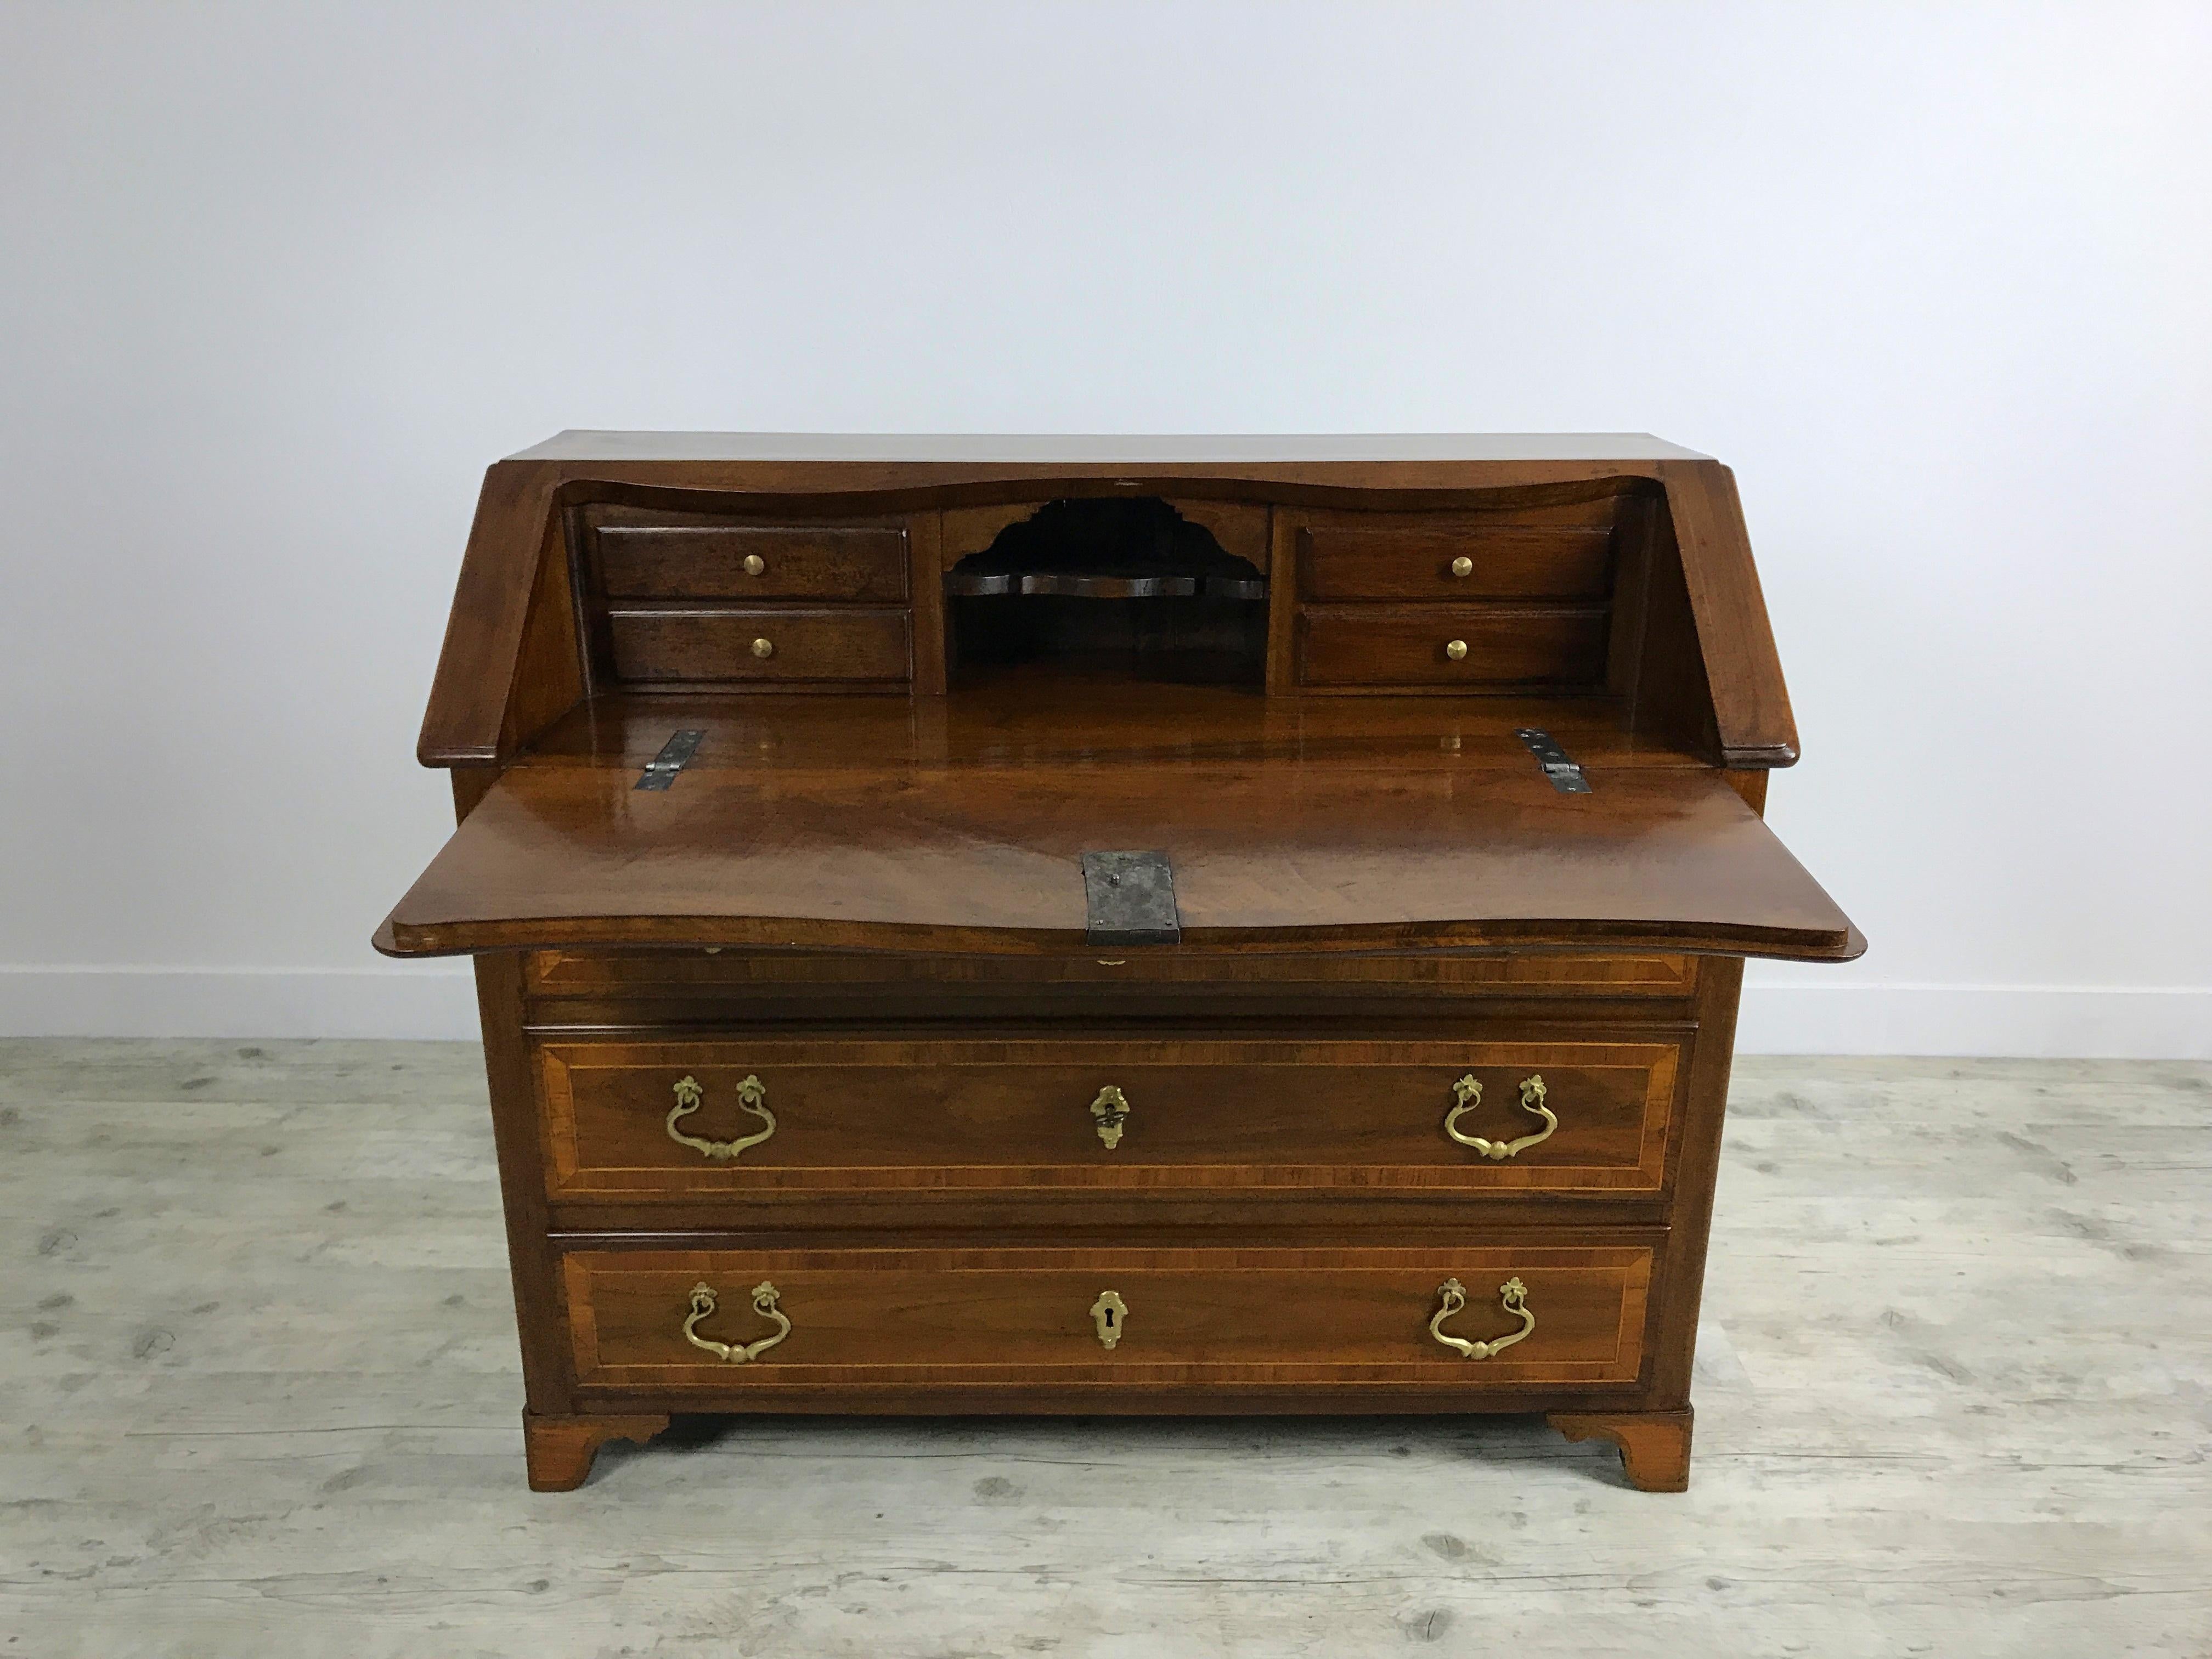 Hand-Carved Italian Inlaid and Solid Walnut Wood Chest of drawers with Secretaire For Sale